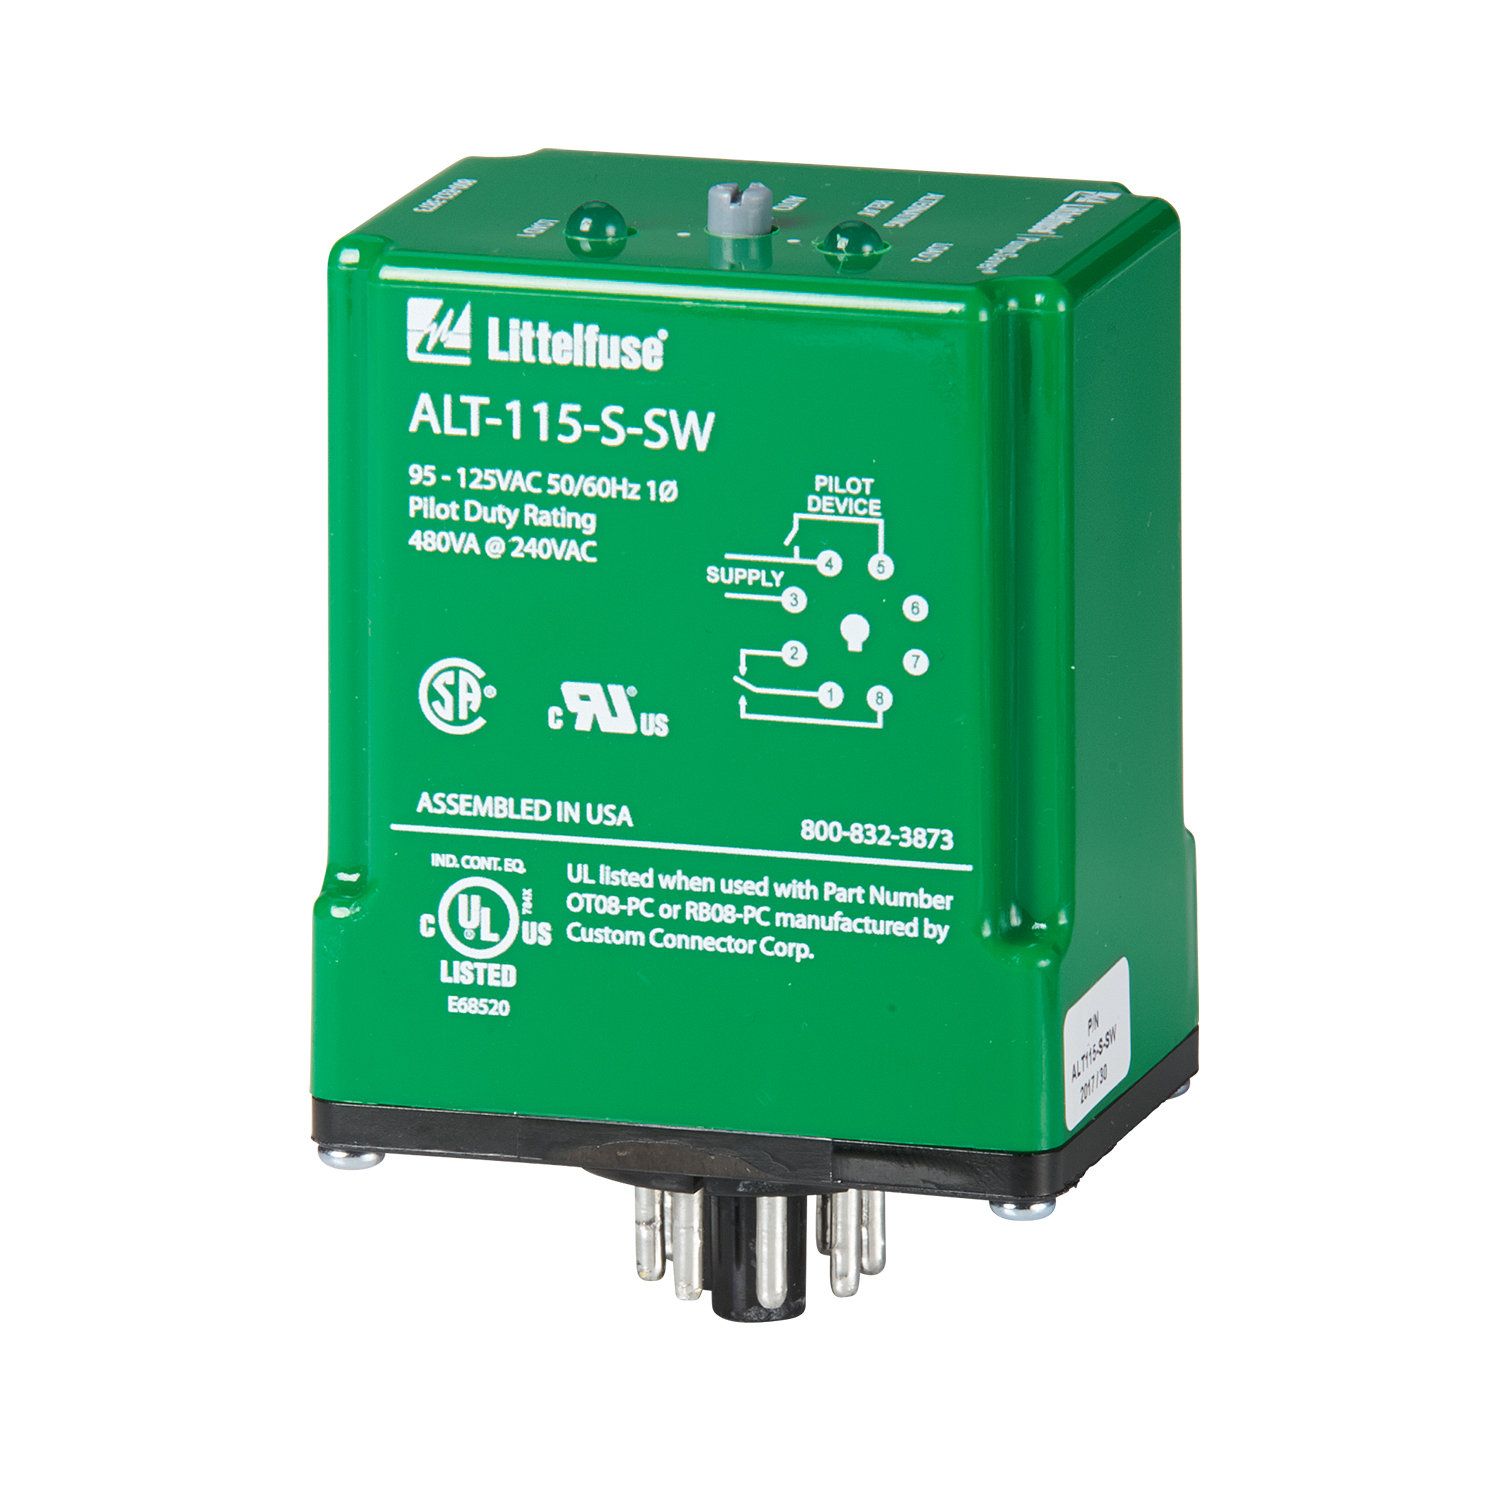 http://www.littelfuse.com/~/media/images/products/protection-relays/pump-controls-liquid-level-controls/littelfuse_protectionrelays_alt_series.jpg